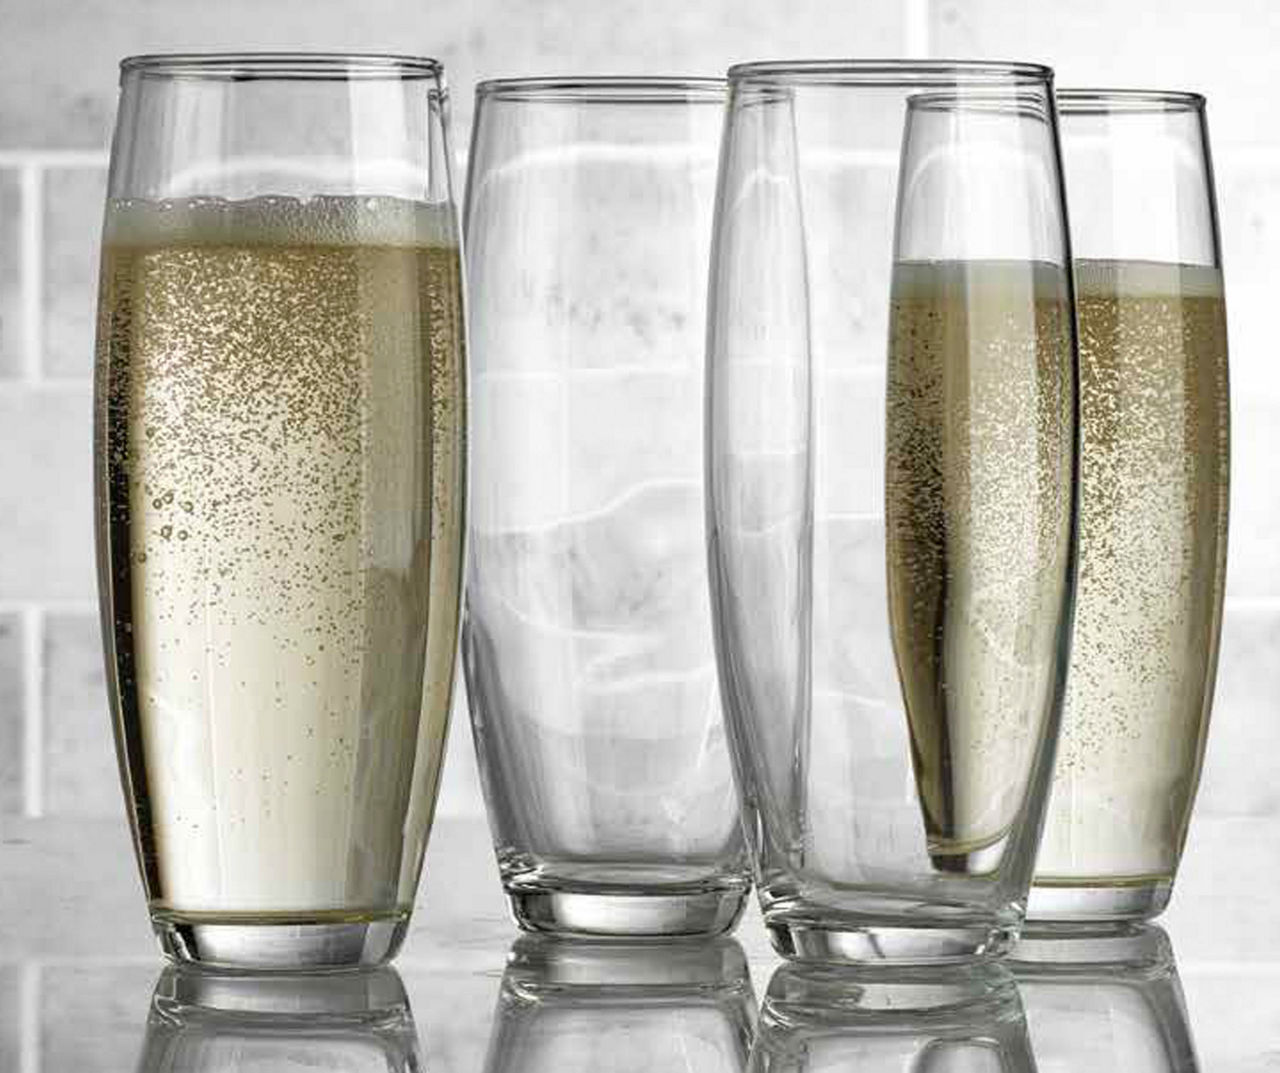 Luxh Stemless Champagne Flutes Glass - Set of 4, 9.4 oz - Pacific